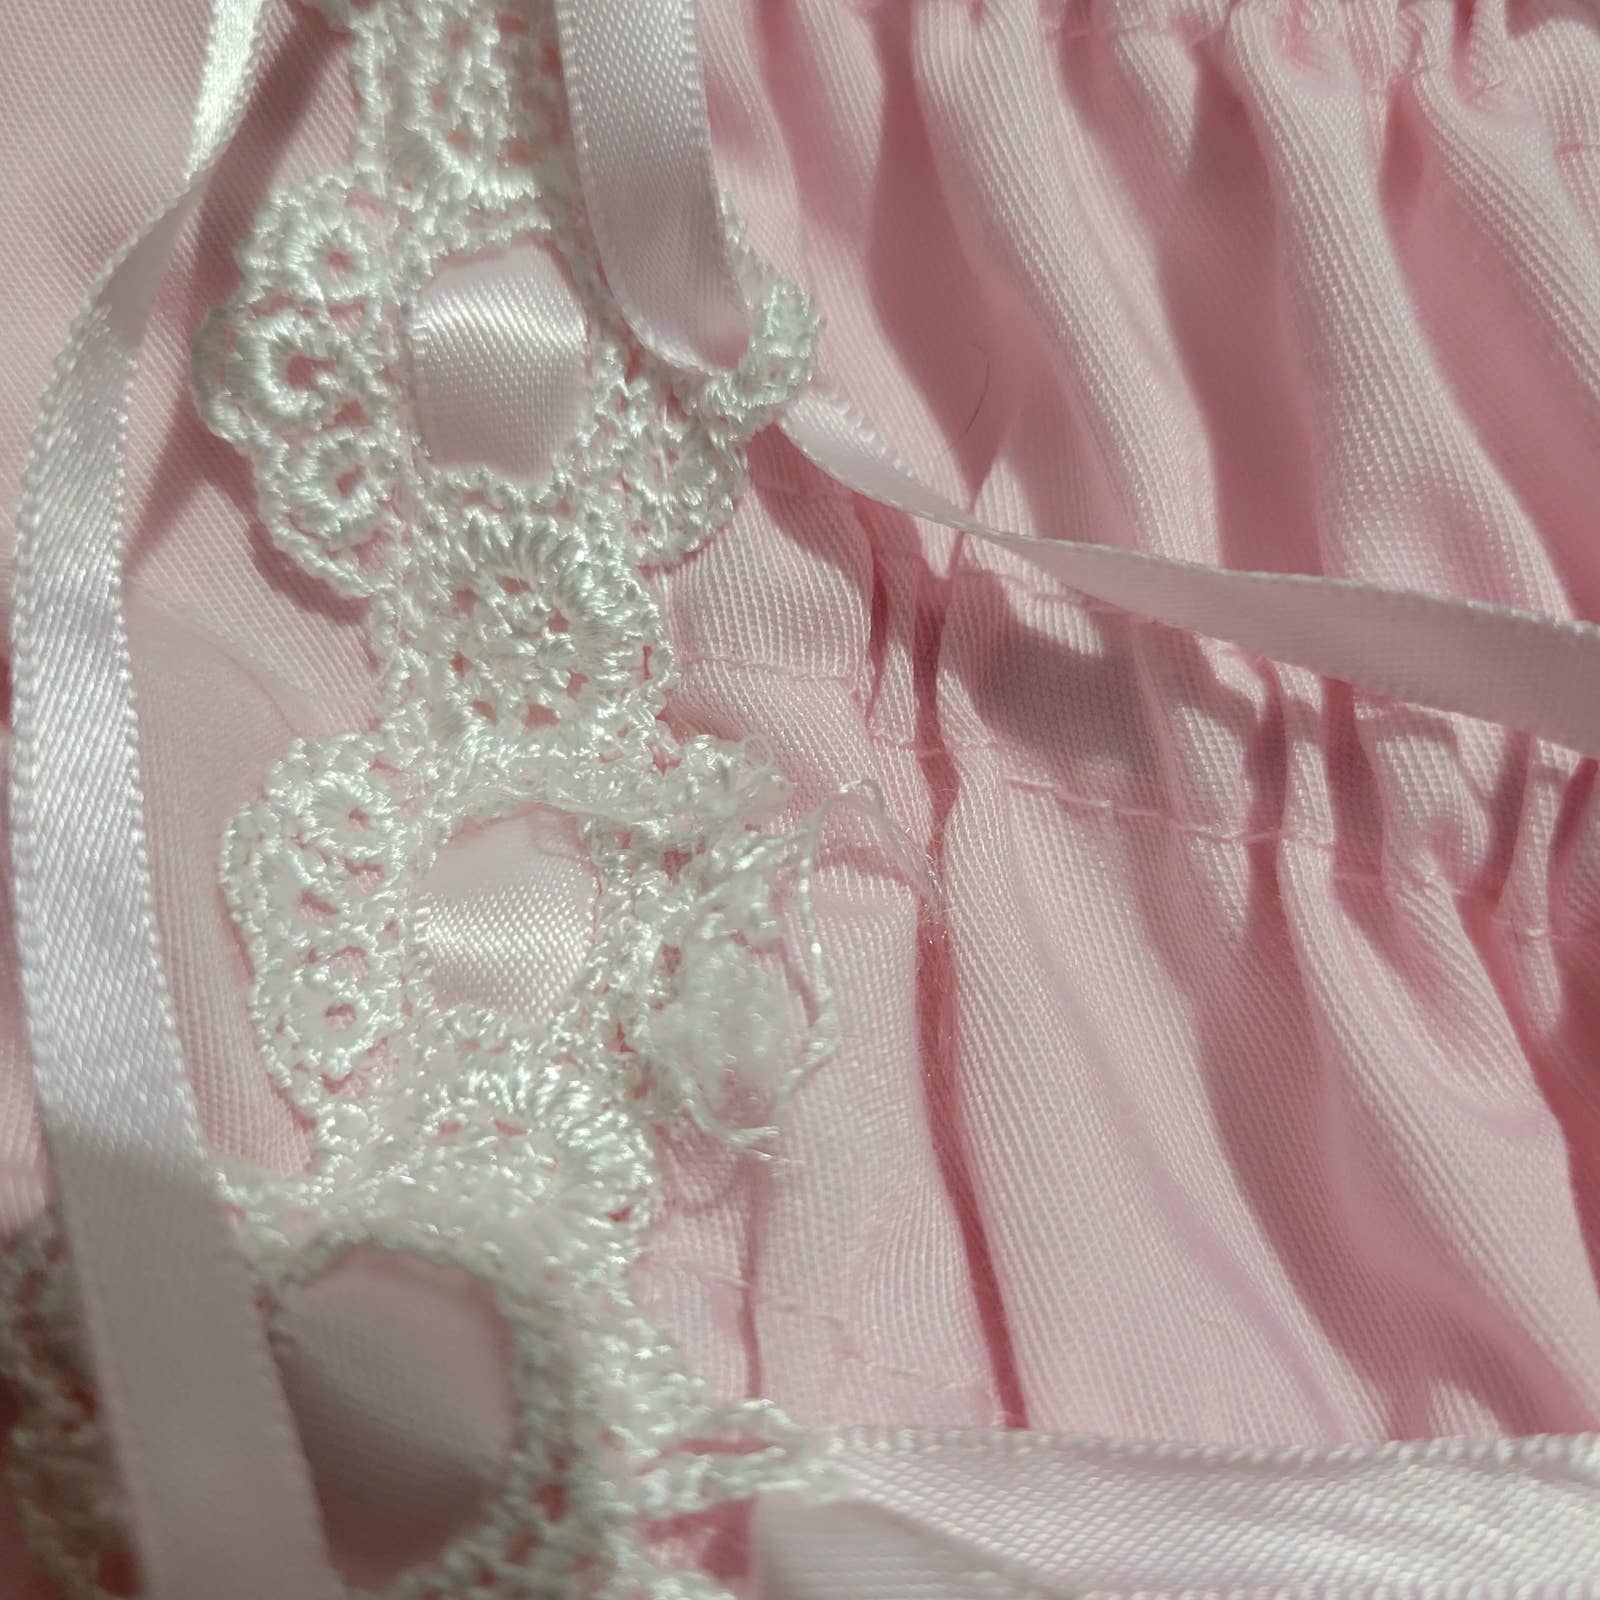 Pink Lolita Dress Coquette Frilly Laced Back Bows Square Neck Sleeveless Cute Sweet Tiered Ribbons Size Small